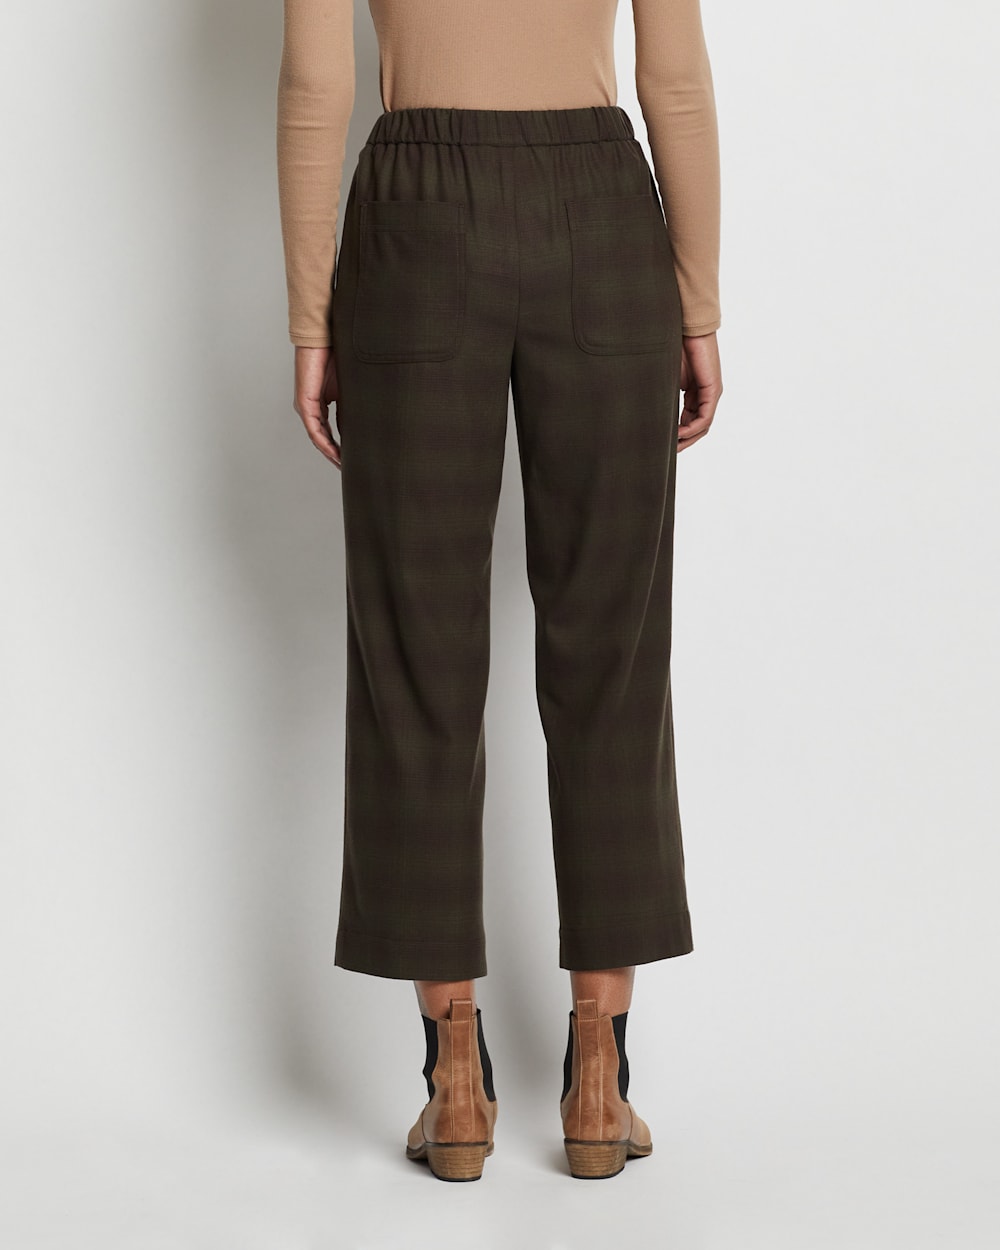 ALTERNATE VIEW OF WOMEN'S BROADWAY MERINO PLAID PANTS IN OLIVE SHADOW image number 4